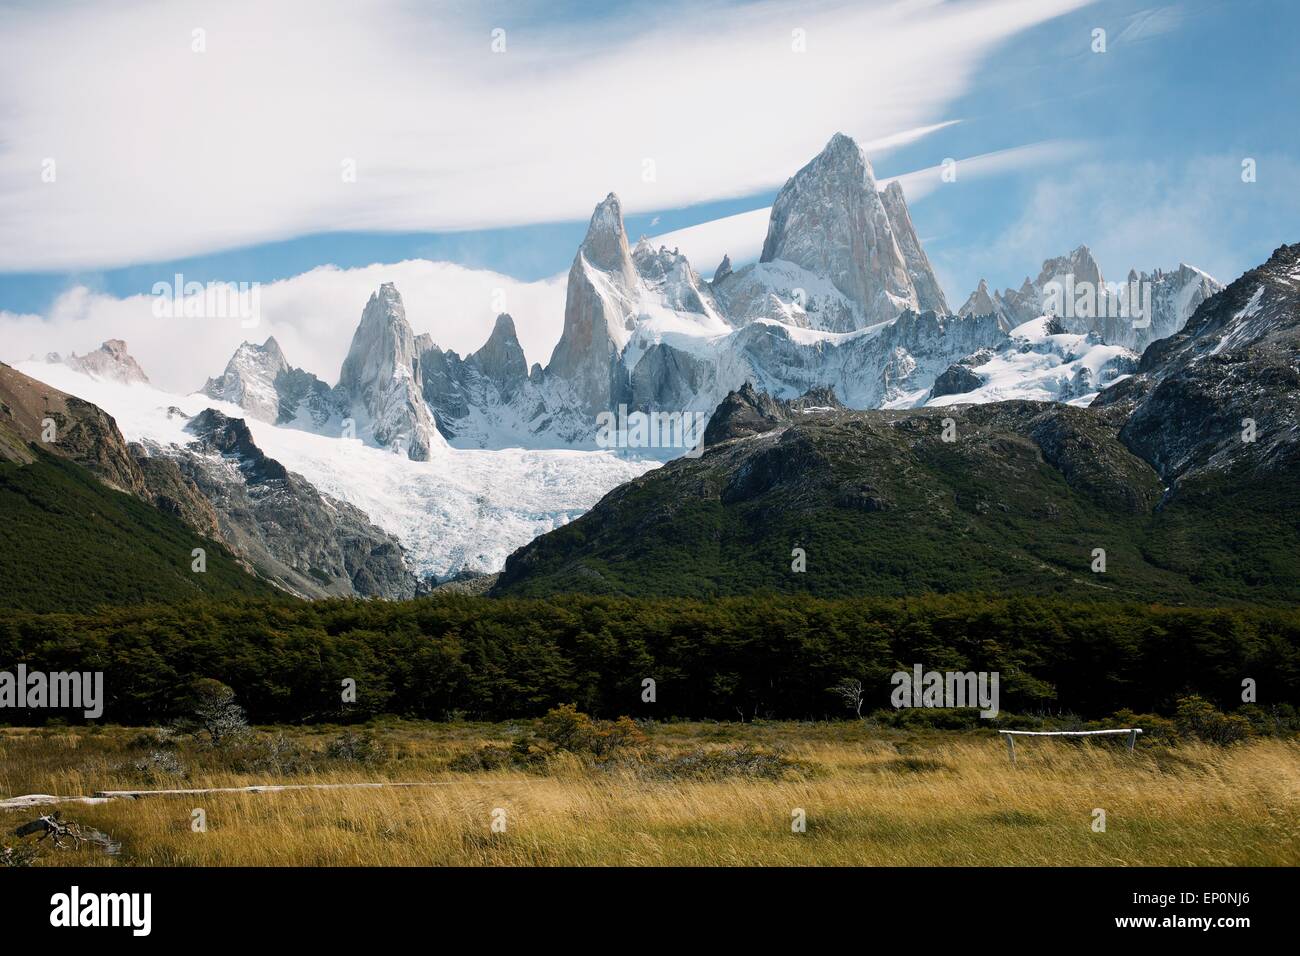 A beautiful view of Monte Fitz Roy, Patagonia, Argentina. Stock Photo